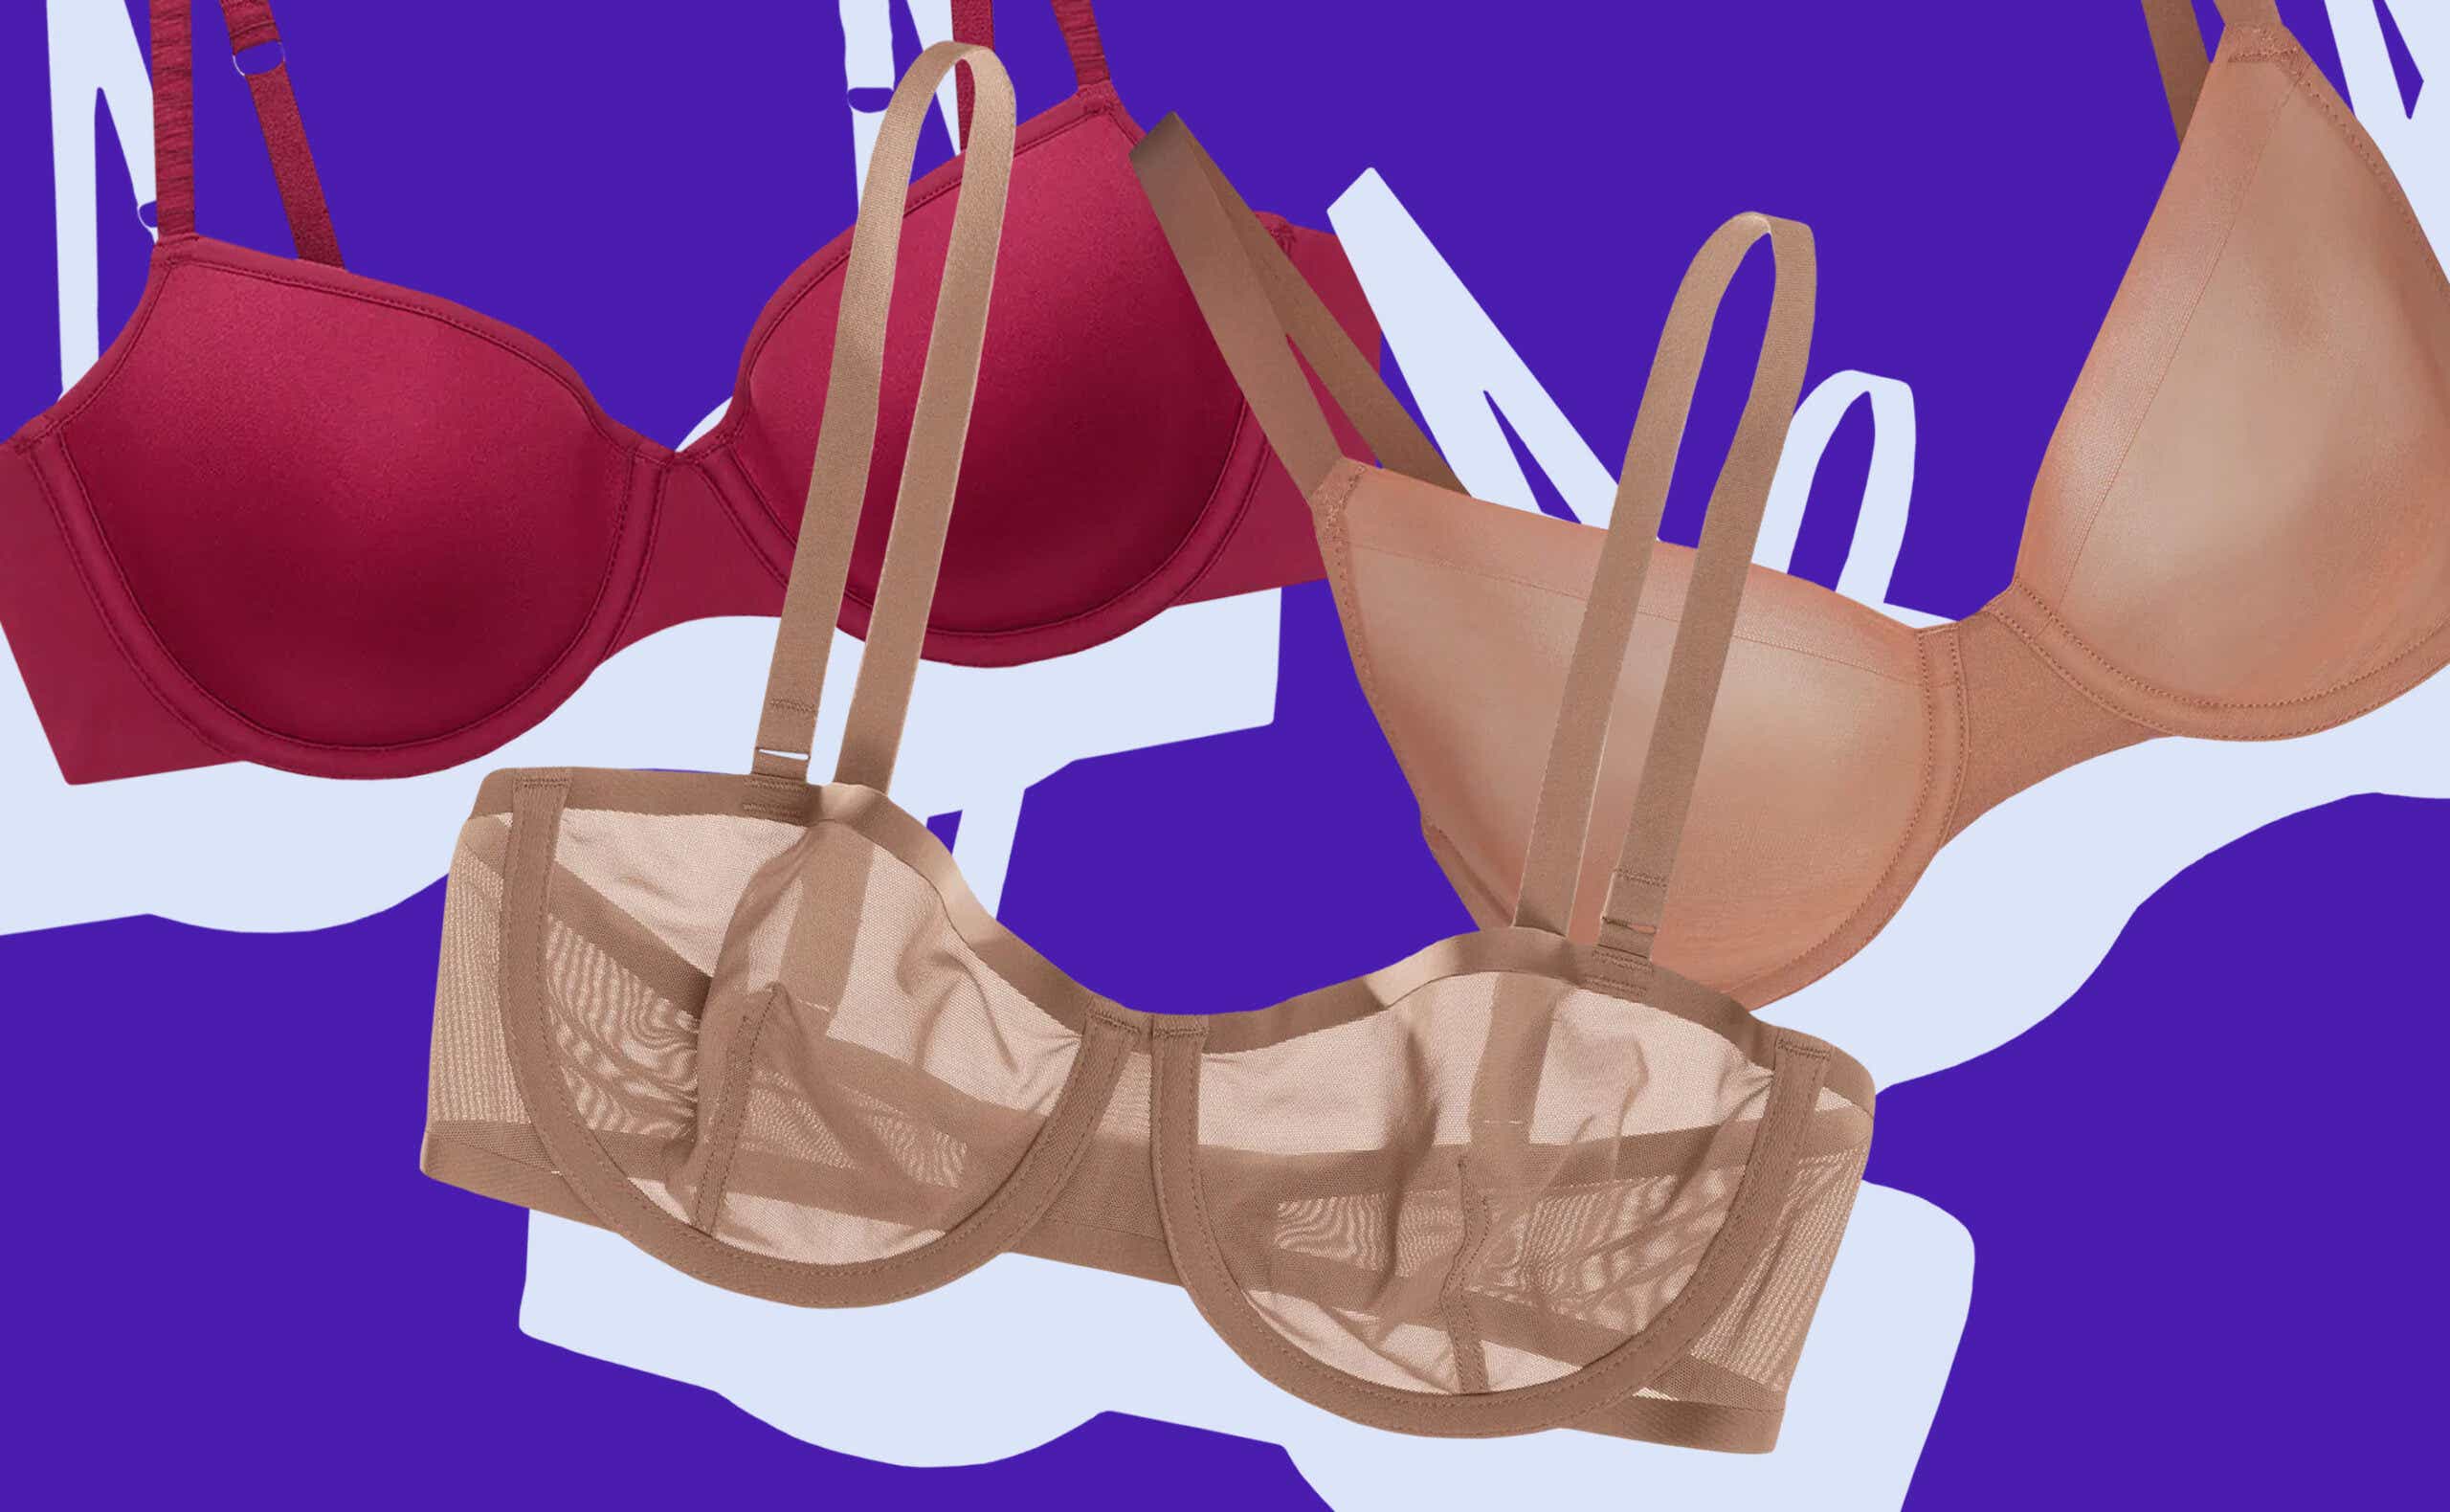 14 Best Bras for Big Boobs - Most Supportive Bras for Big Breast Sizes